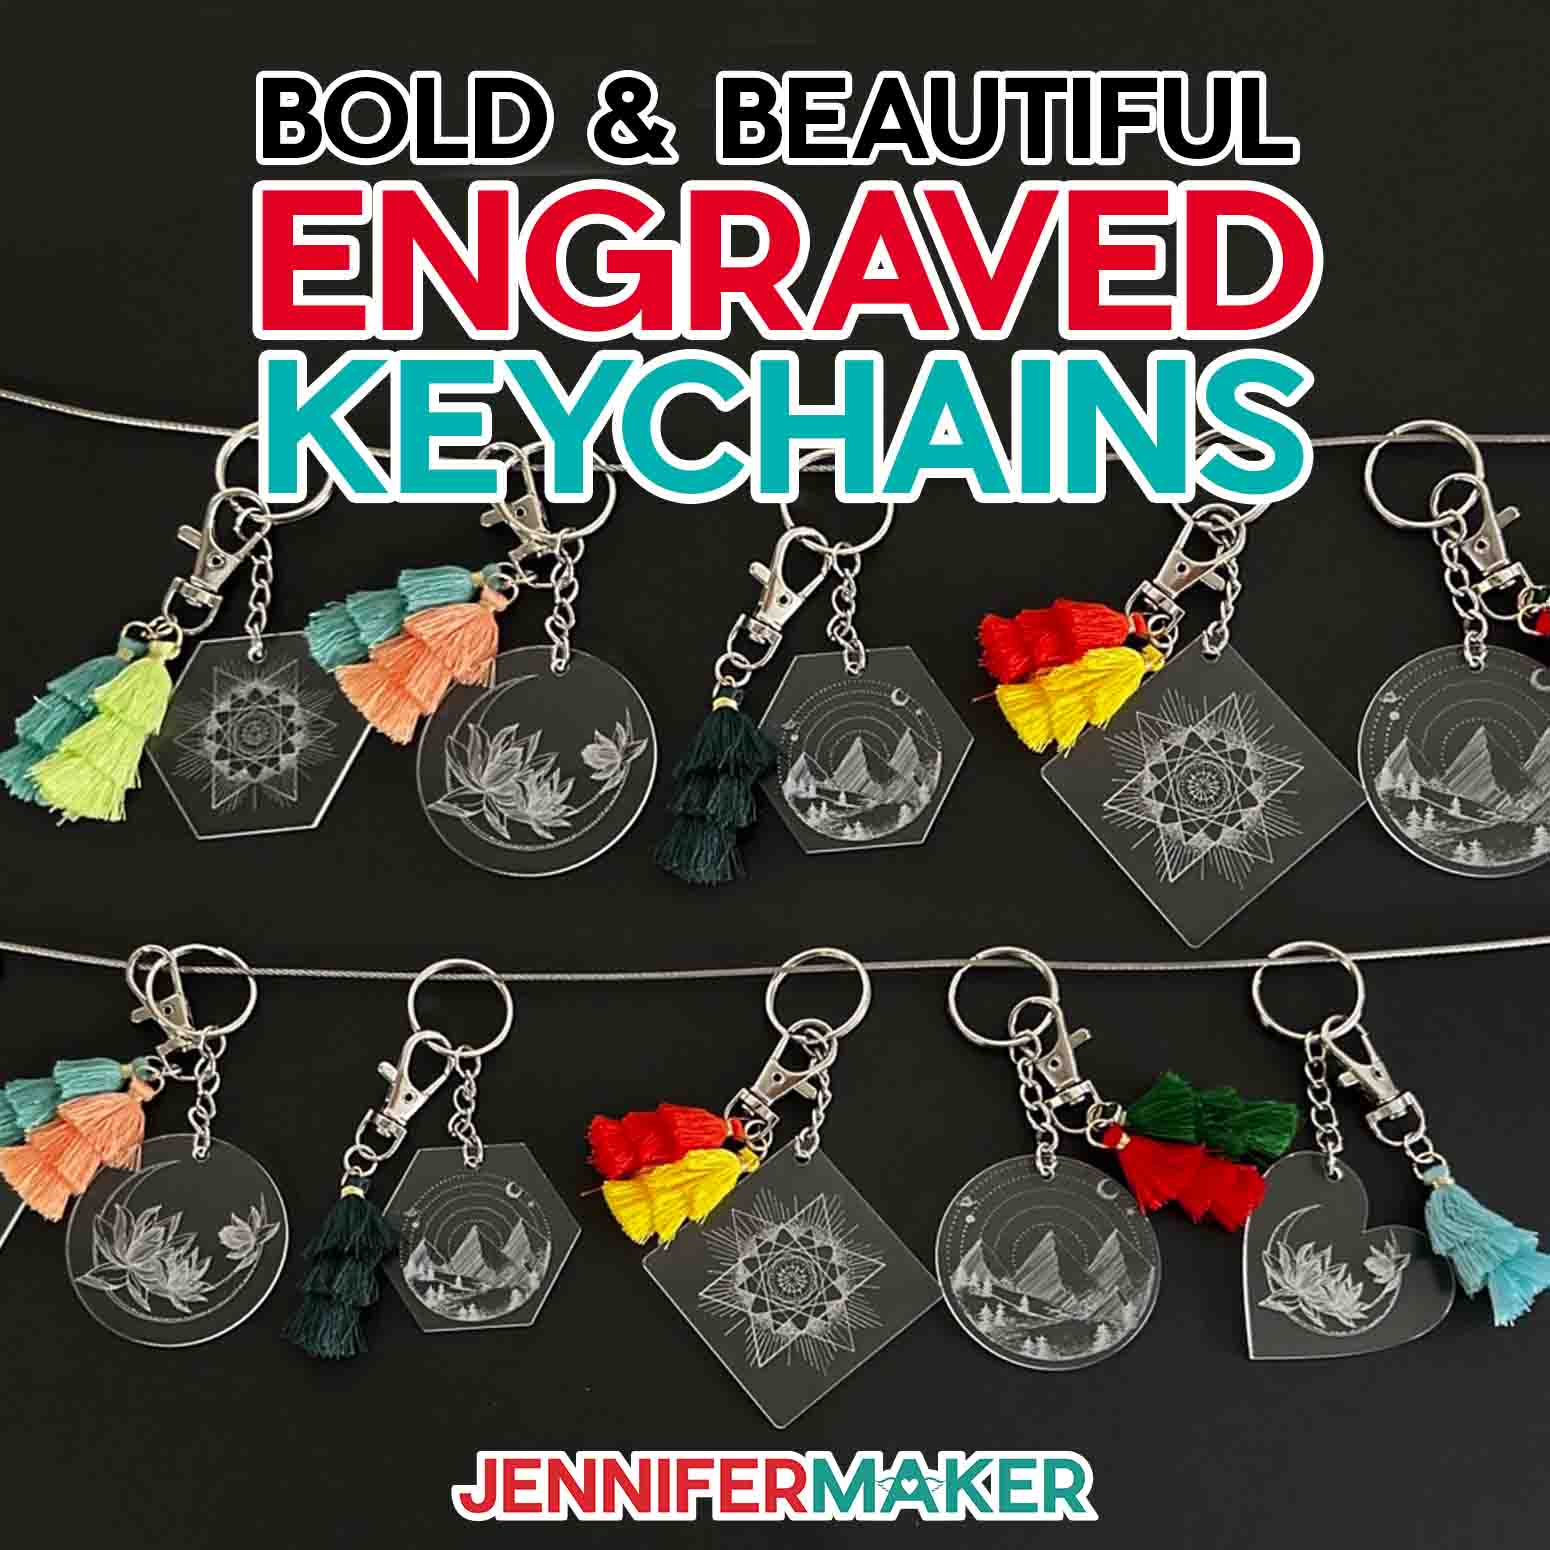 Clear acrylic engraved keychain collection with delicate designs and colorful tassels hanging on horizontal strings.